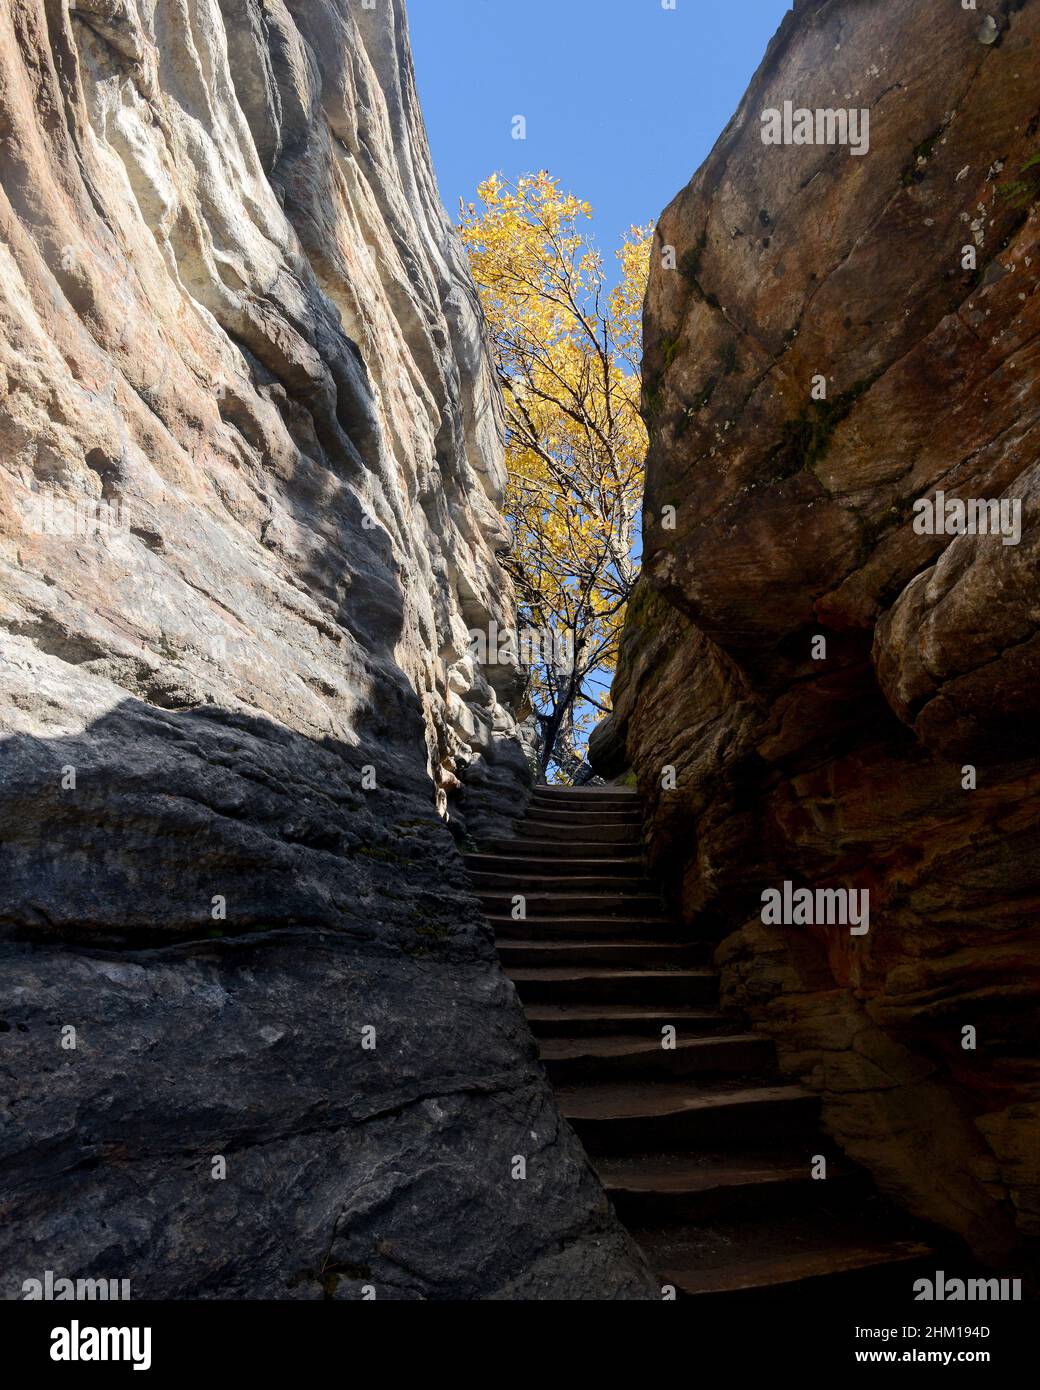 Stairway built through mountain for a view Stock Photo